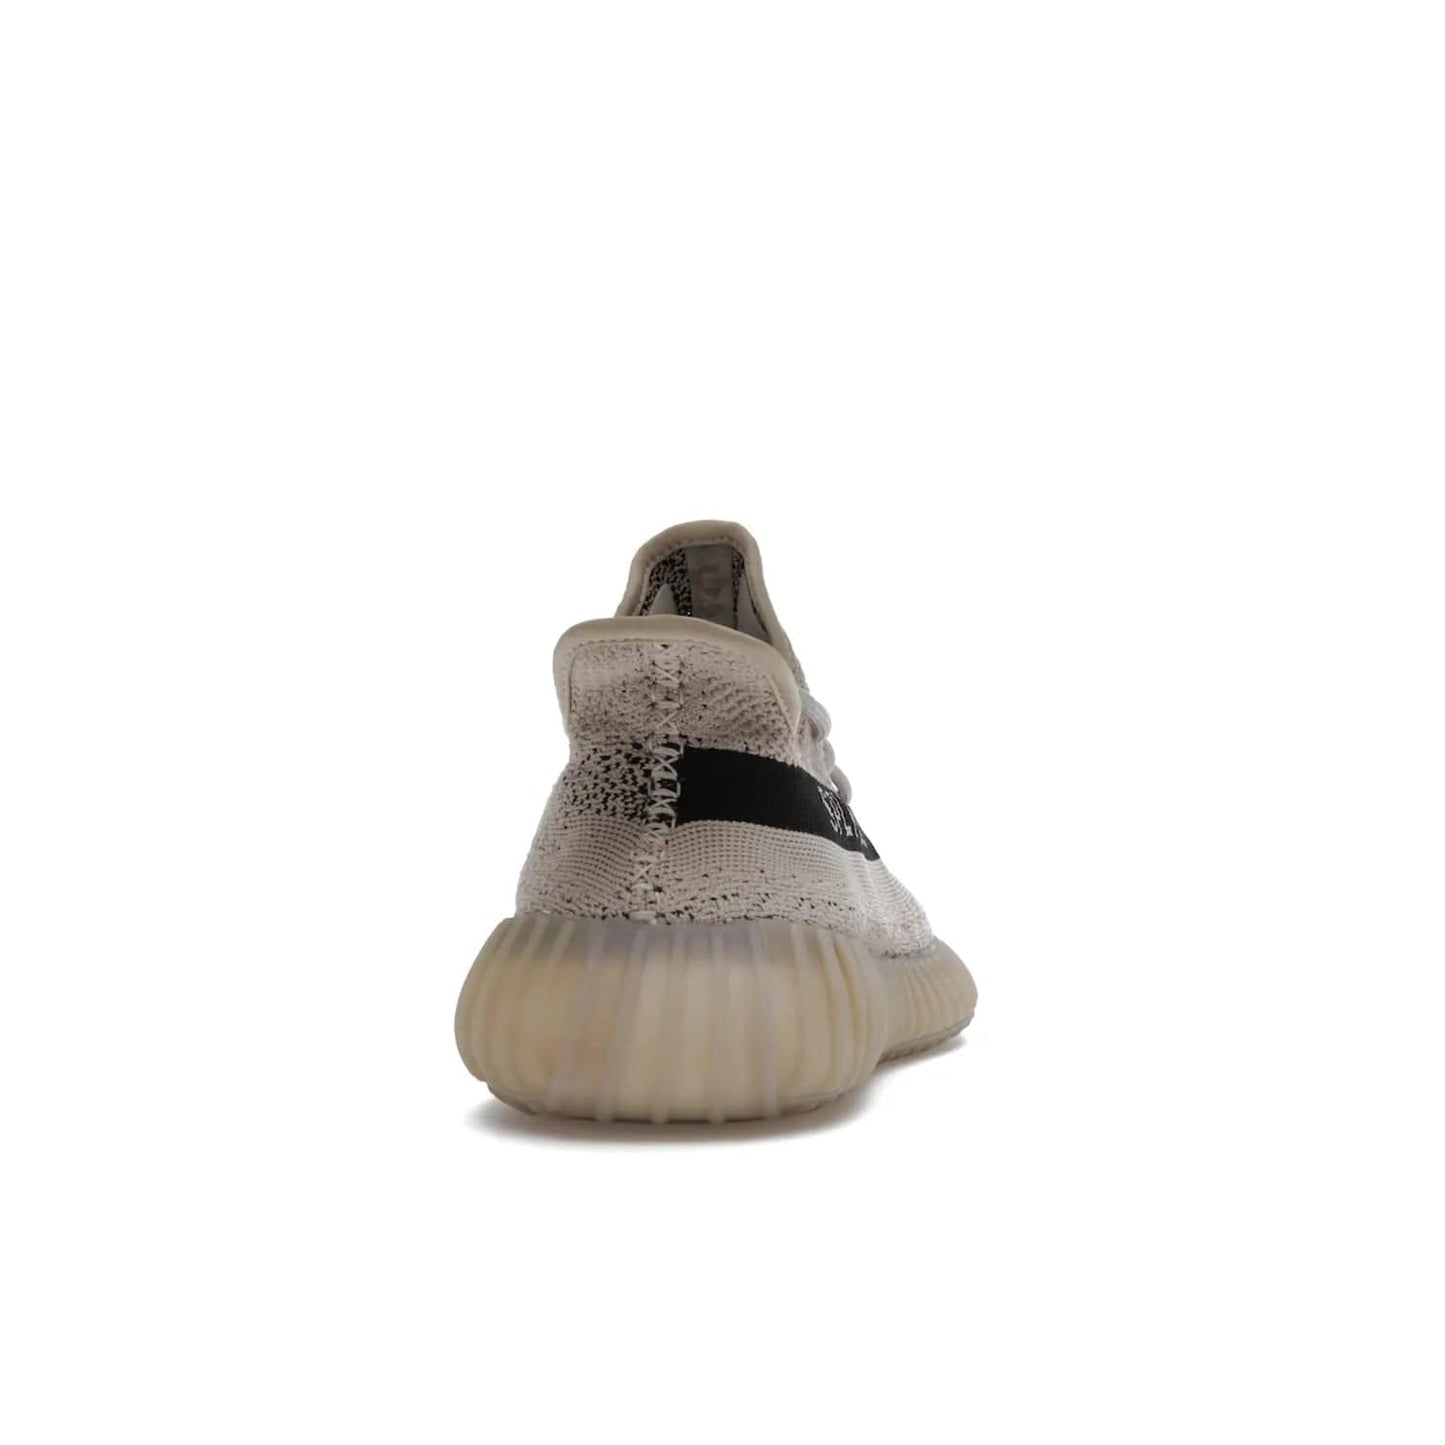 adidas Yeezy Boost 350 V2 Slate - Image 29 - Only at www.BallersClubKickz.com - Adidas Yeezy Boost 350 V2 Slate Core Black Slate featuring Primeknit upper, Boost midsole and semi-translucent TPU cage. Launched on 3/9/2022, retailed at $230.